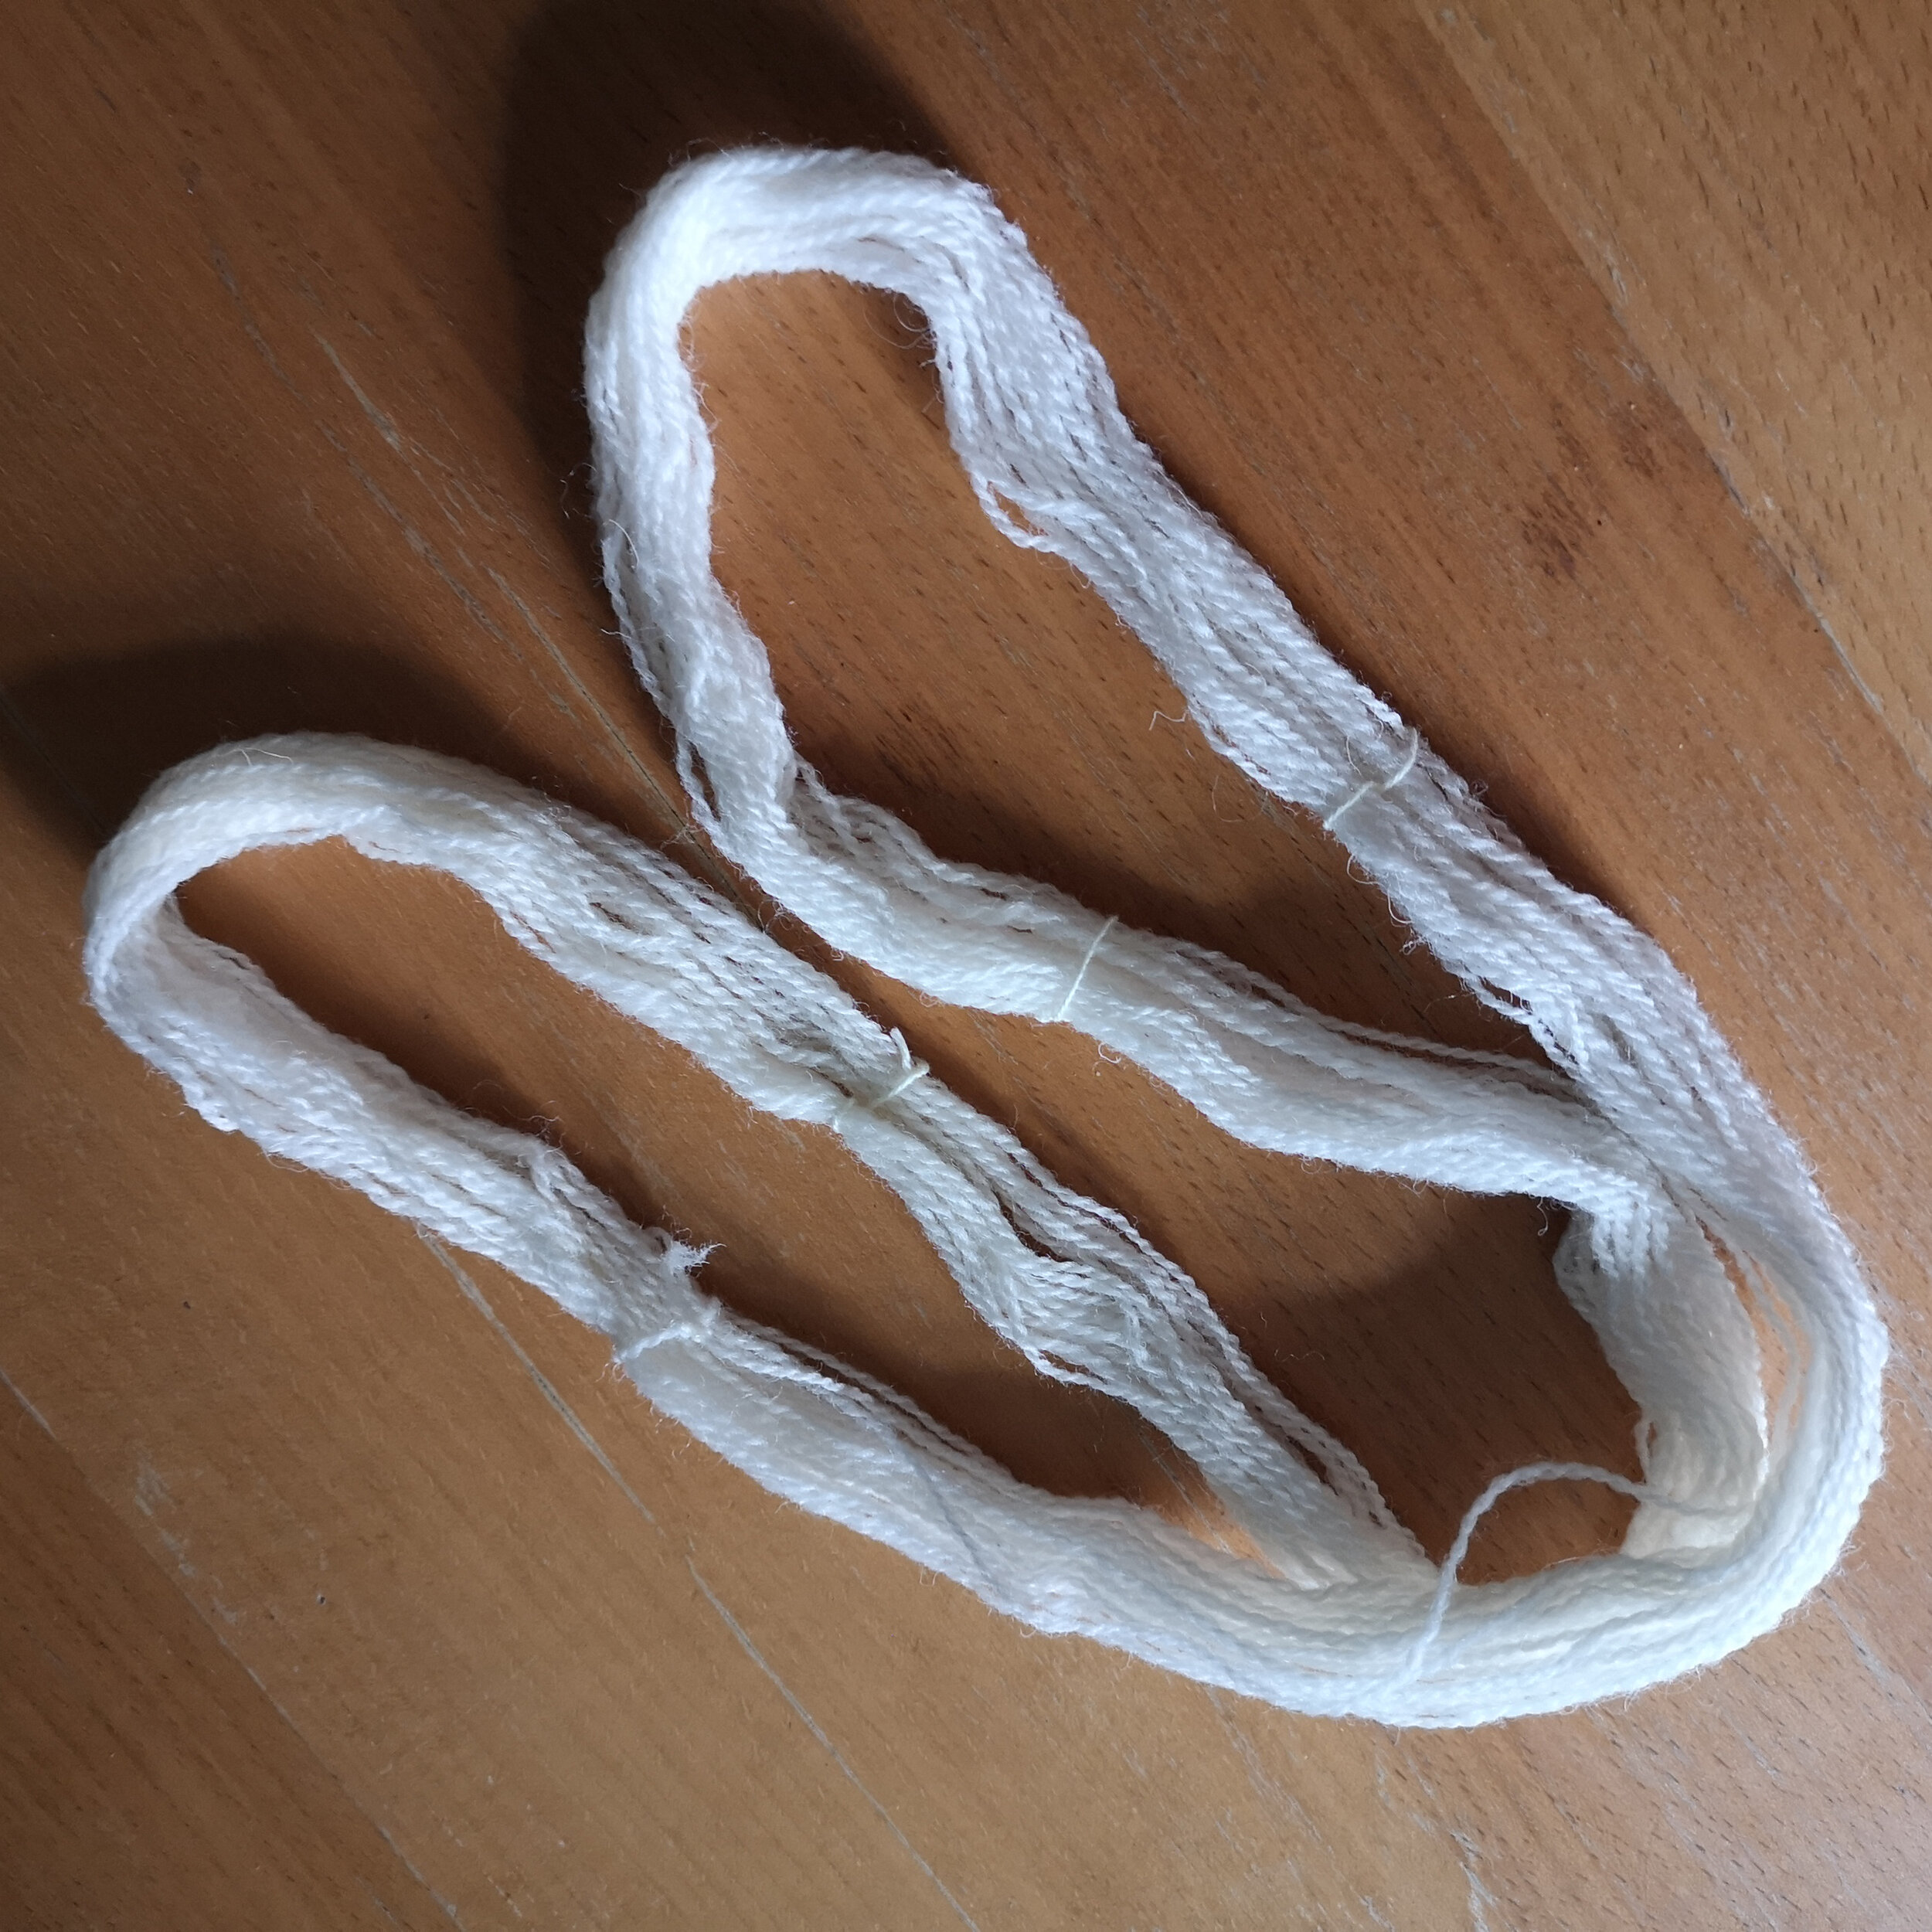 Skein tied in 4 places with string